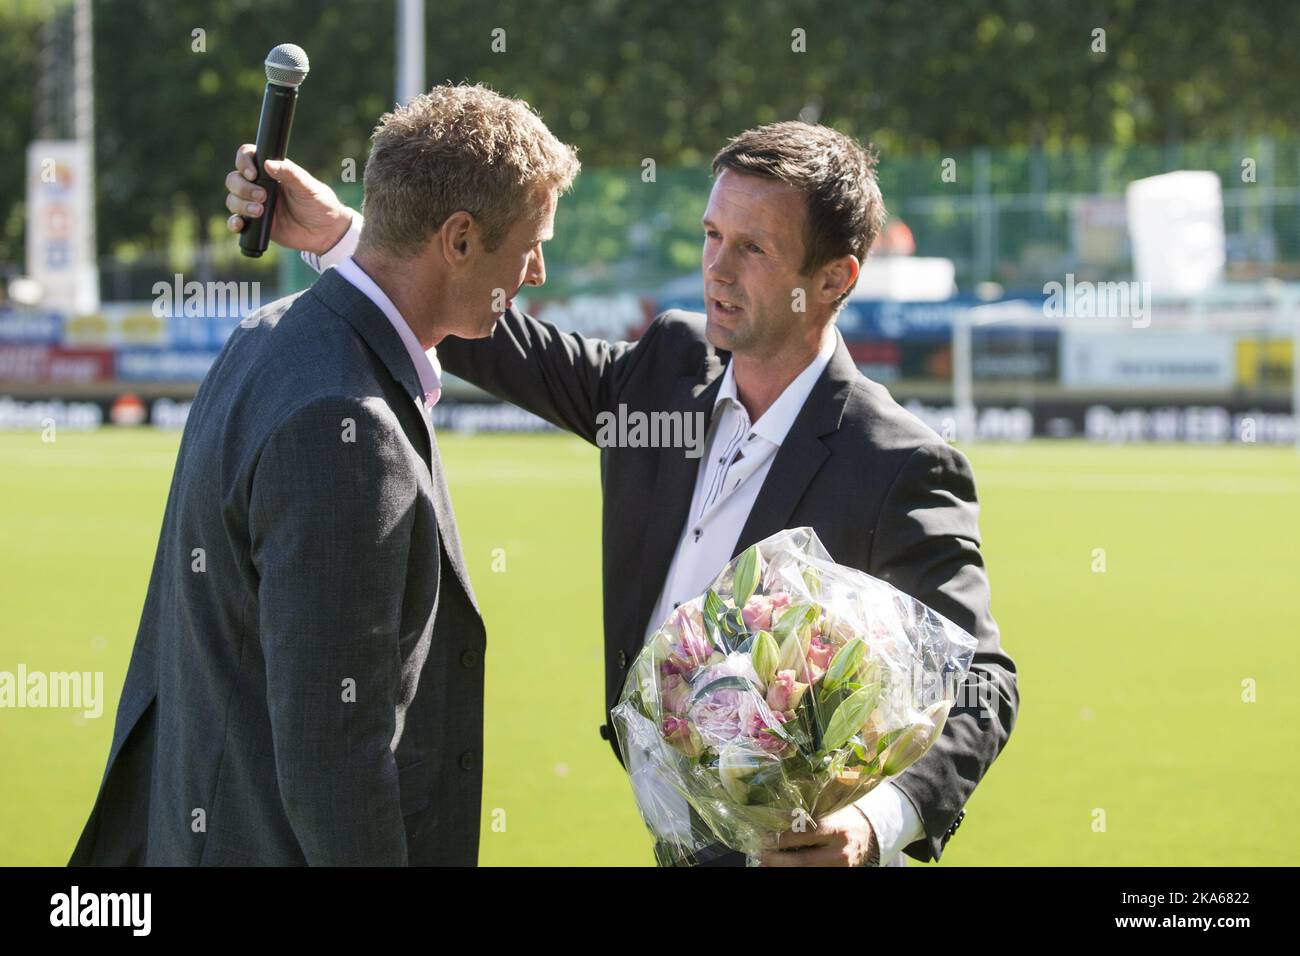 Outgoing manager of Stromsgodset FK and incoming manager of Scottish Premiership club Celtic Ronny Deila (R) is given flowers by Director of Football in Stromsgodset, Jostein Flo after half time of the match between Deila`s former club Stromsgodset and Haugesund in the Norwegian top football league in Drammen, 9 June 2014. Photo by Audun Braastad, NTB scanpix Stock Photo